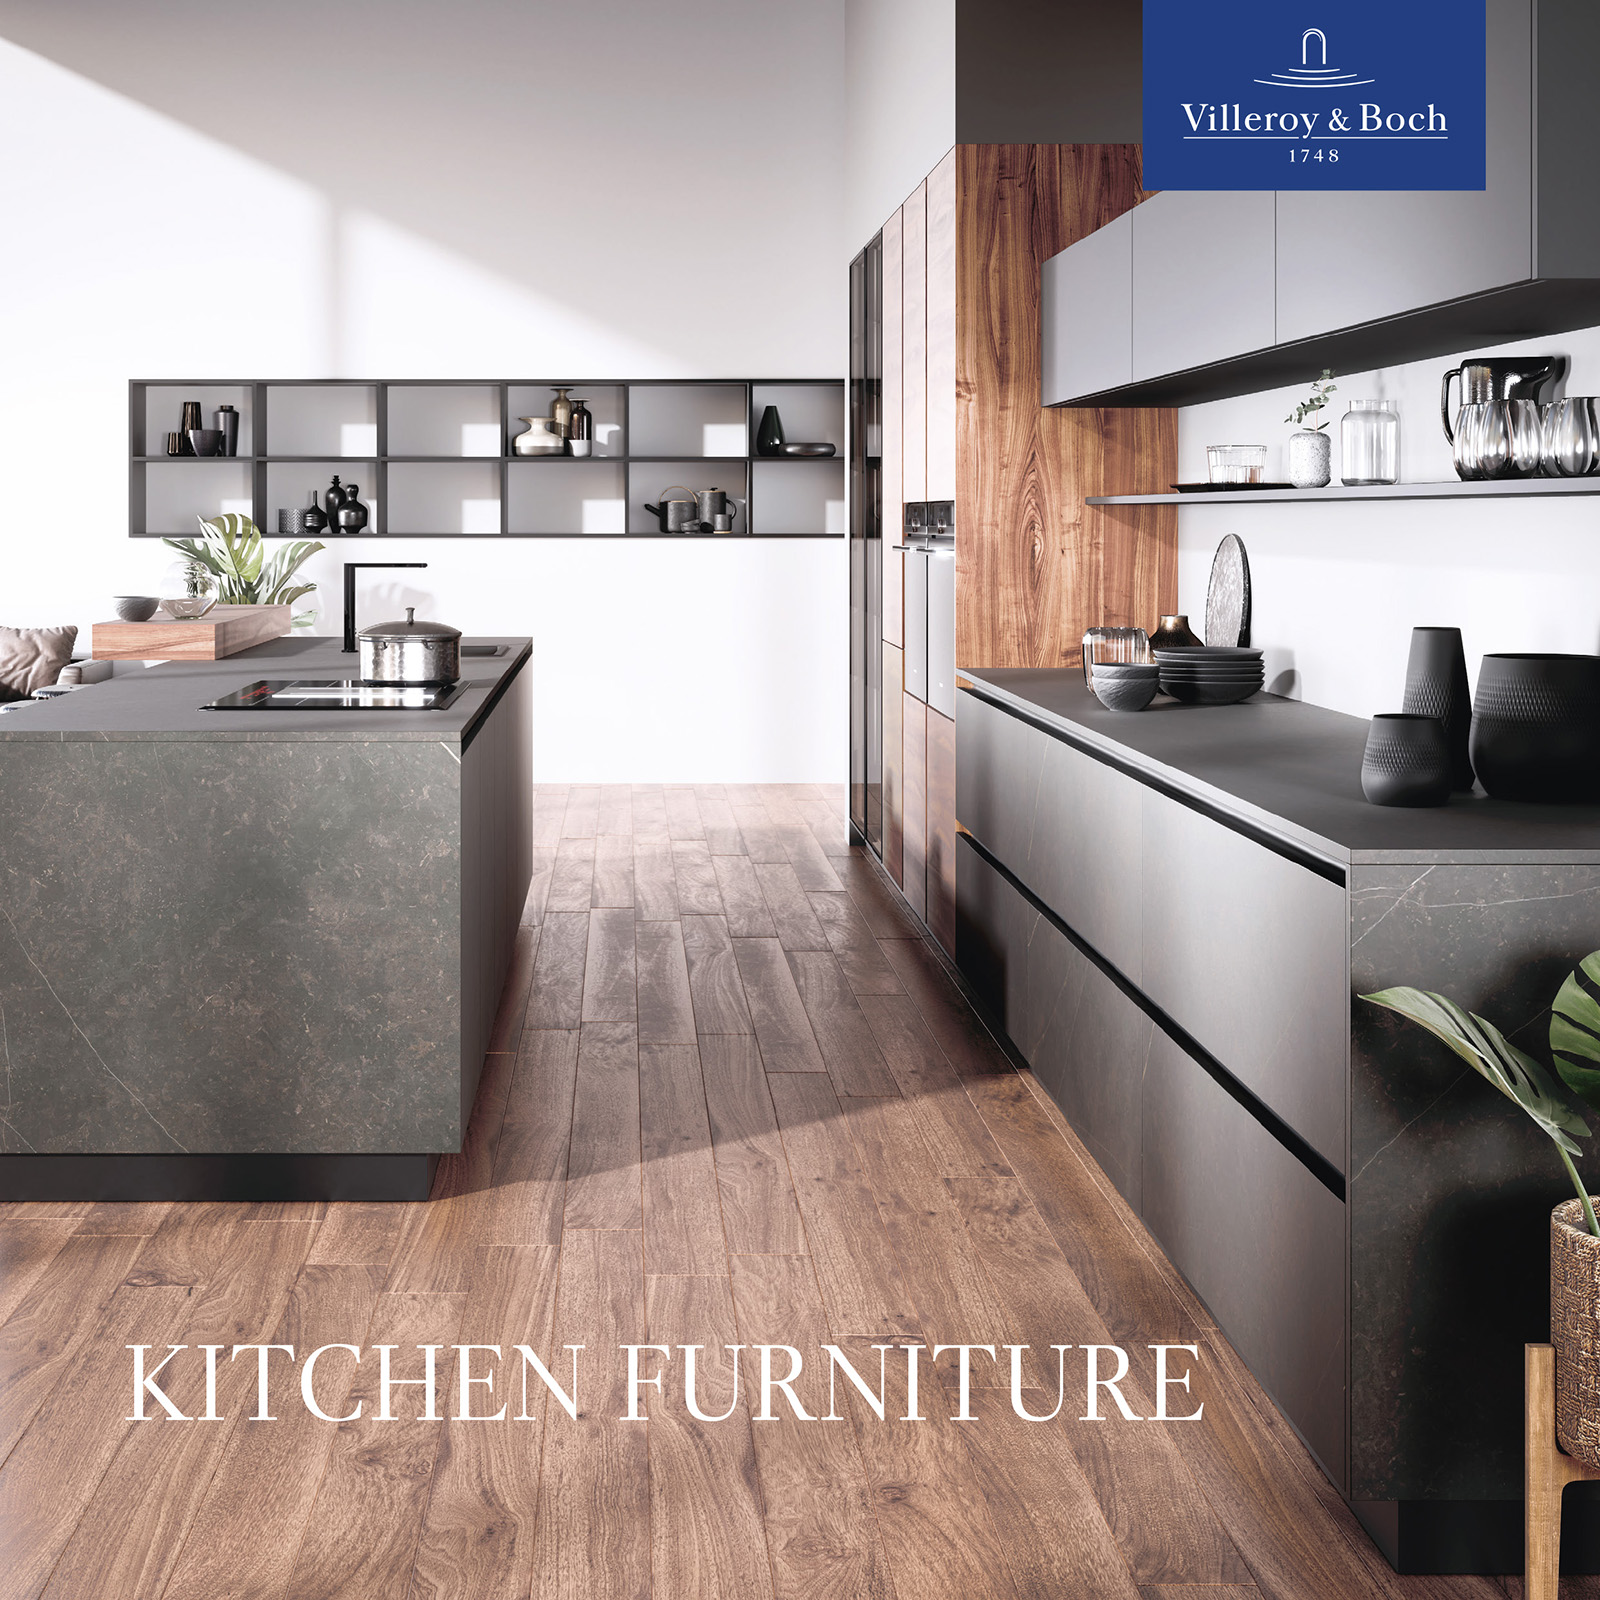 Villeroy & Boch Kitchens launches new Finest collection brochure